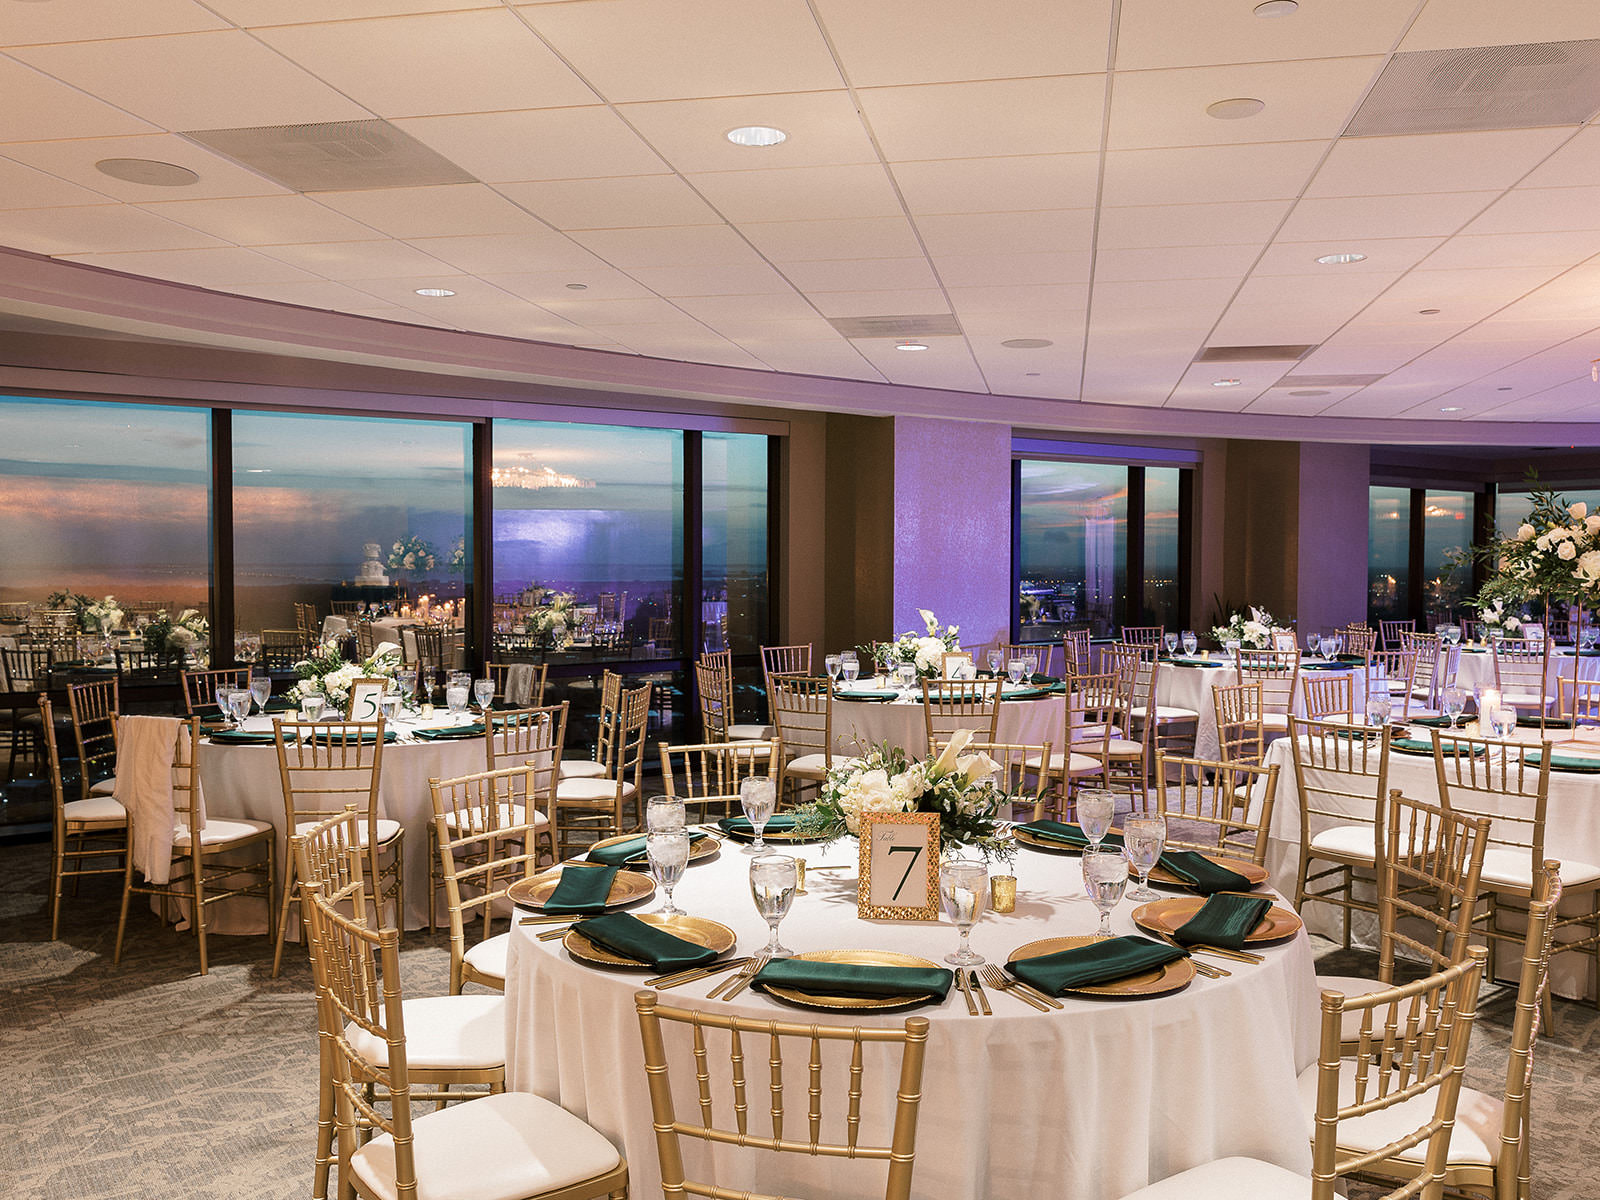 Canopy Ballroom Classic Evening Wedding Reception Decor Inspiration | Green Linen and Gold Chargers | Gold Frame Table Number | Gold Chiavari Chairs | Downtown Venue The Tampa Club | Over The Top Linen Rentals